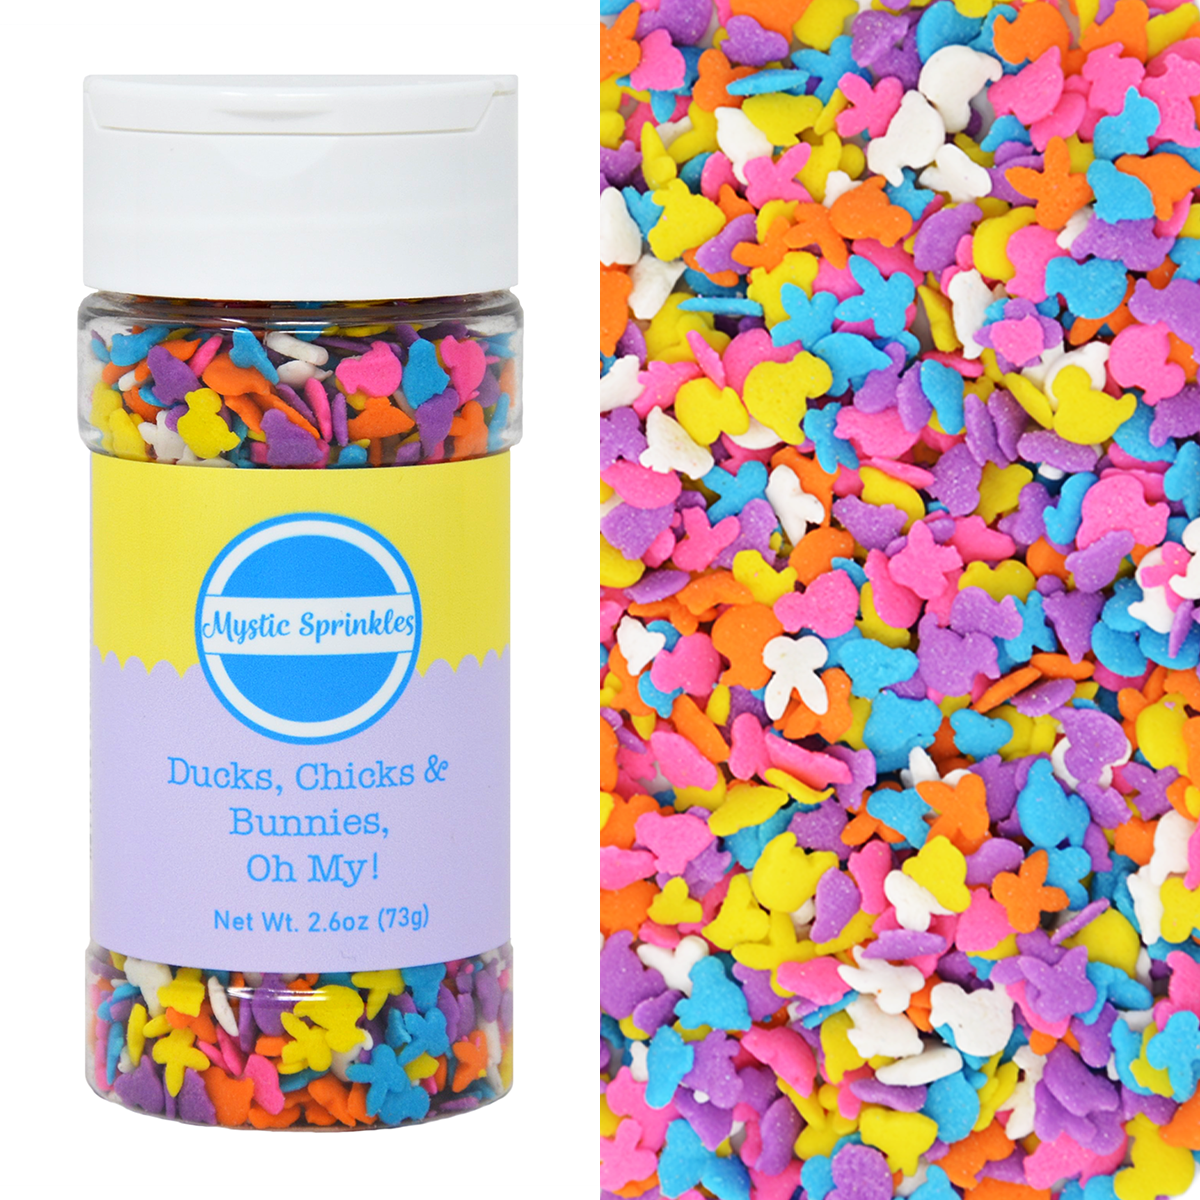 Ducks, Chicks & Bunnies, Oh My! Easter Confetti Sprinkle Mix 2.6oz Bottle